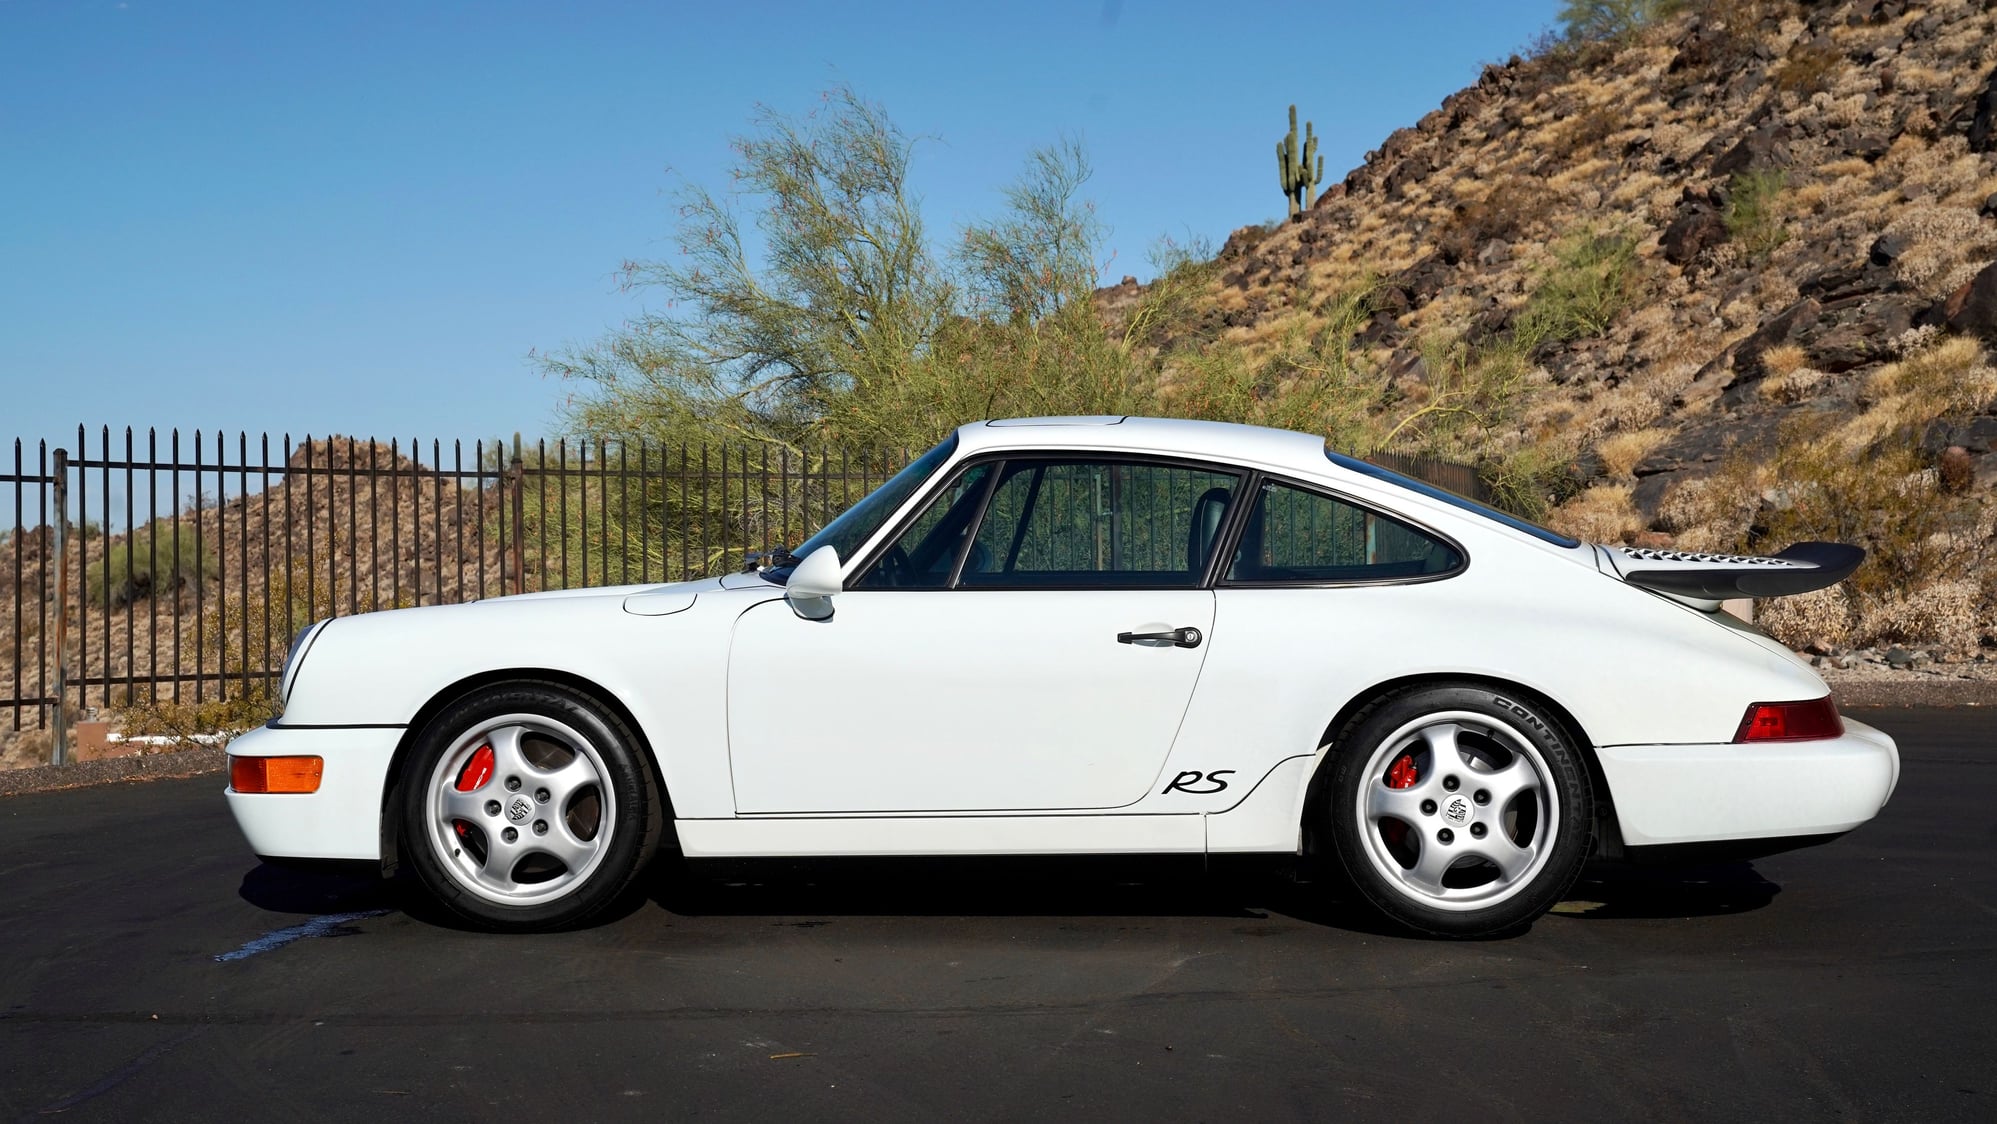 1993 Porsche 911 -  - Used - VIN WP0AB2969PS419321 - 94,600 Miles - 6 cyl - 2WD - Manual - Coupe - White - Phoenix, AZ 85013, United States